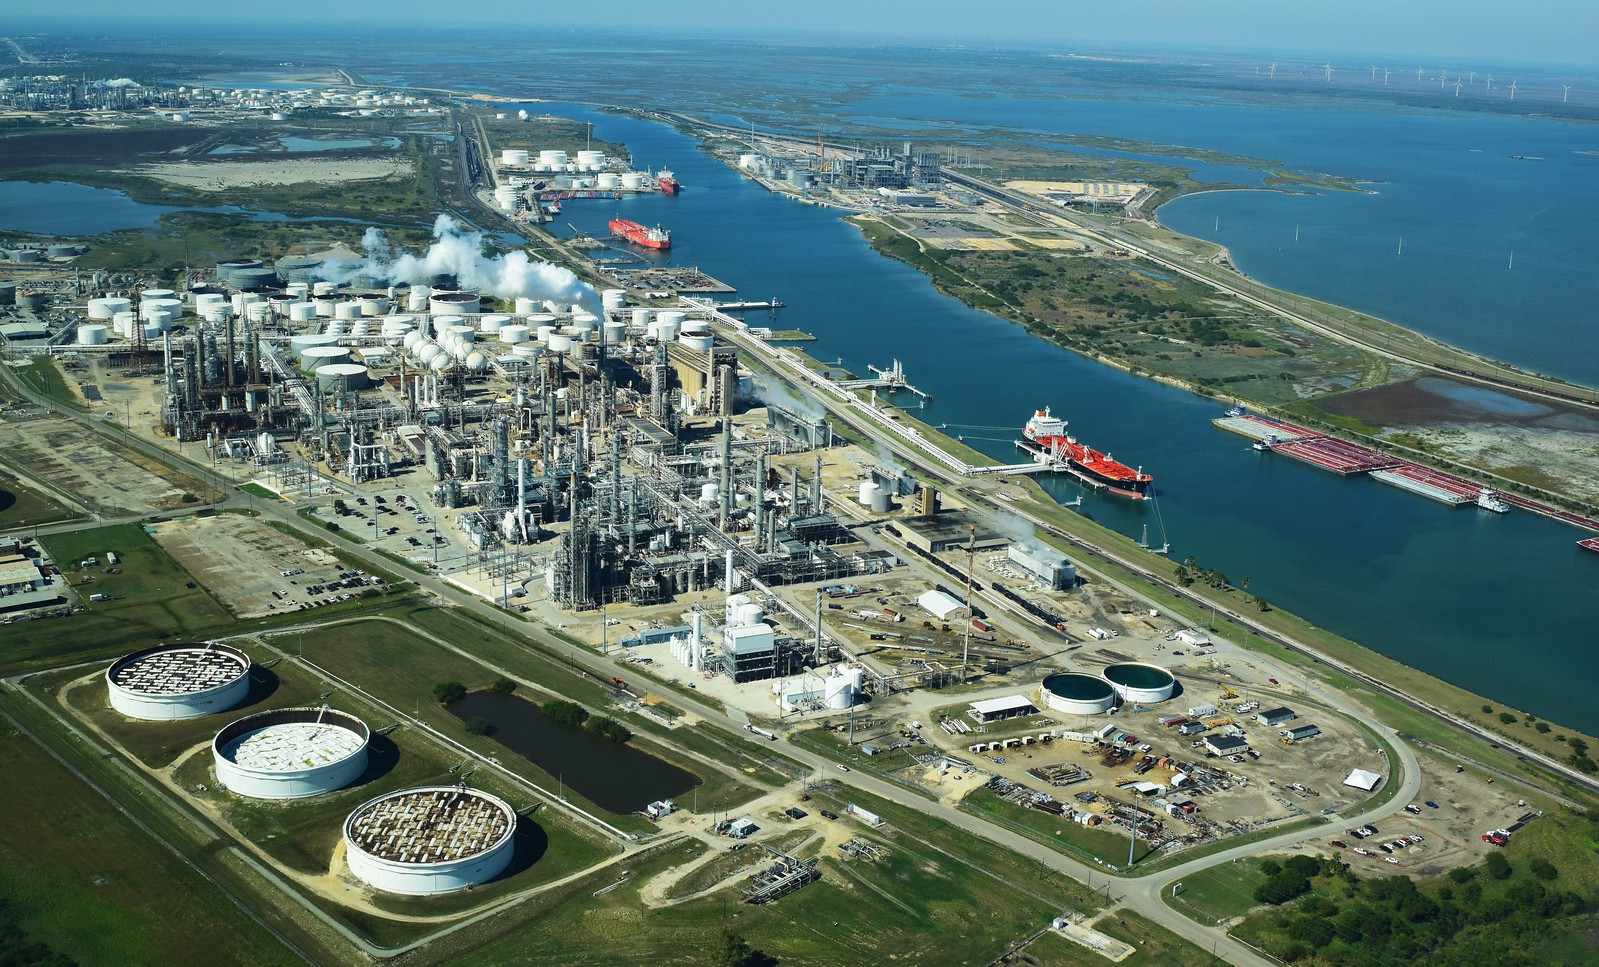 industrial oil and plastics facilities on the Gulf of Mexico